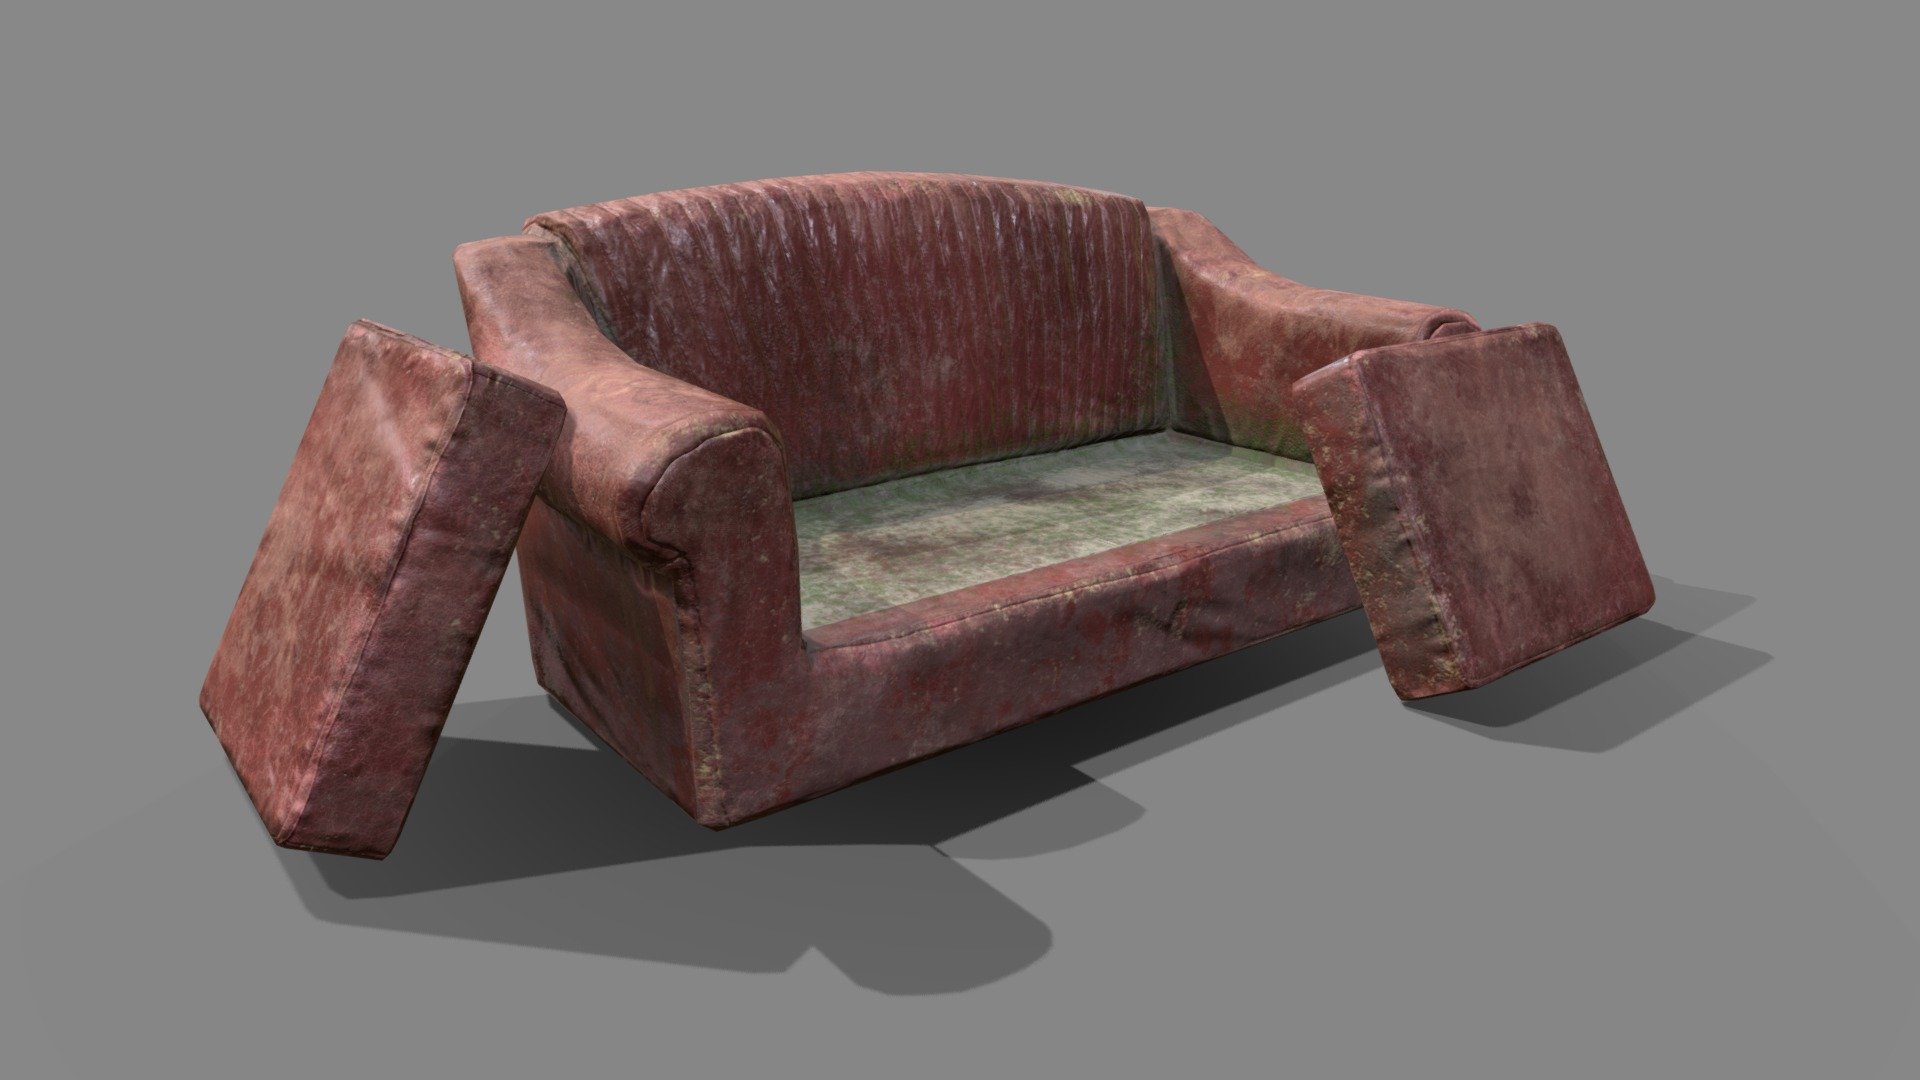 Old abandoned couch. 

721 polys,  719 verts.

Textures: AO,base, normal, roughness, metallic. 4096x4096 3d model